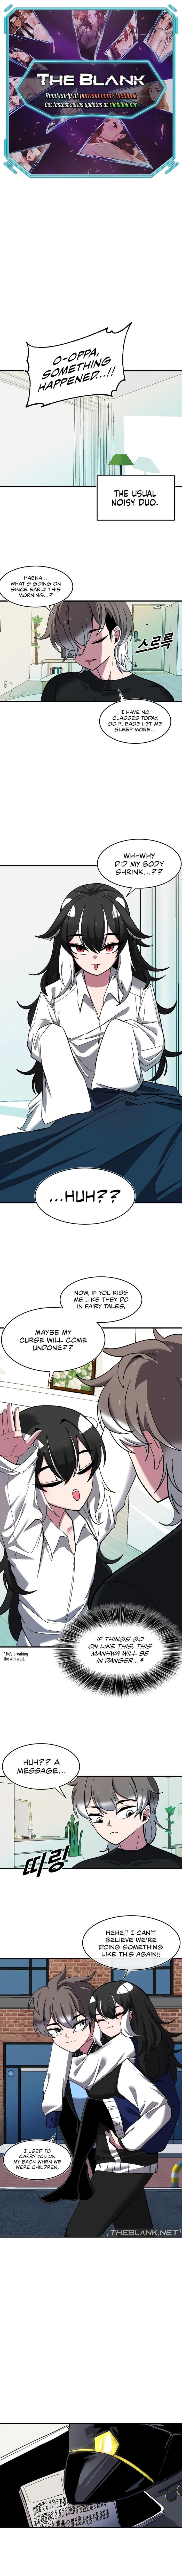 Double Life of Gukbap - Chapter 18 Page 1